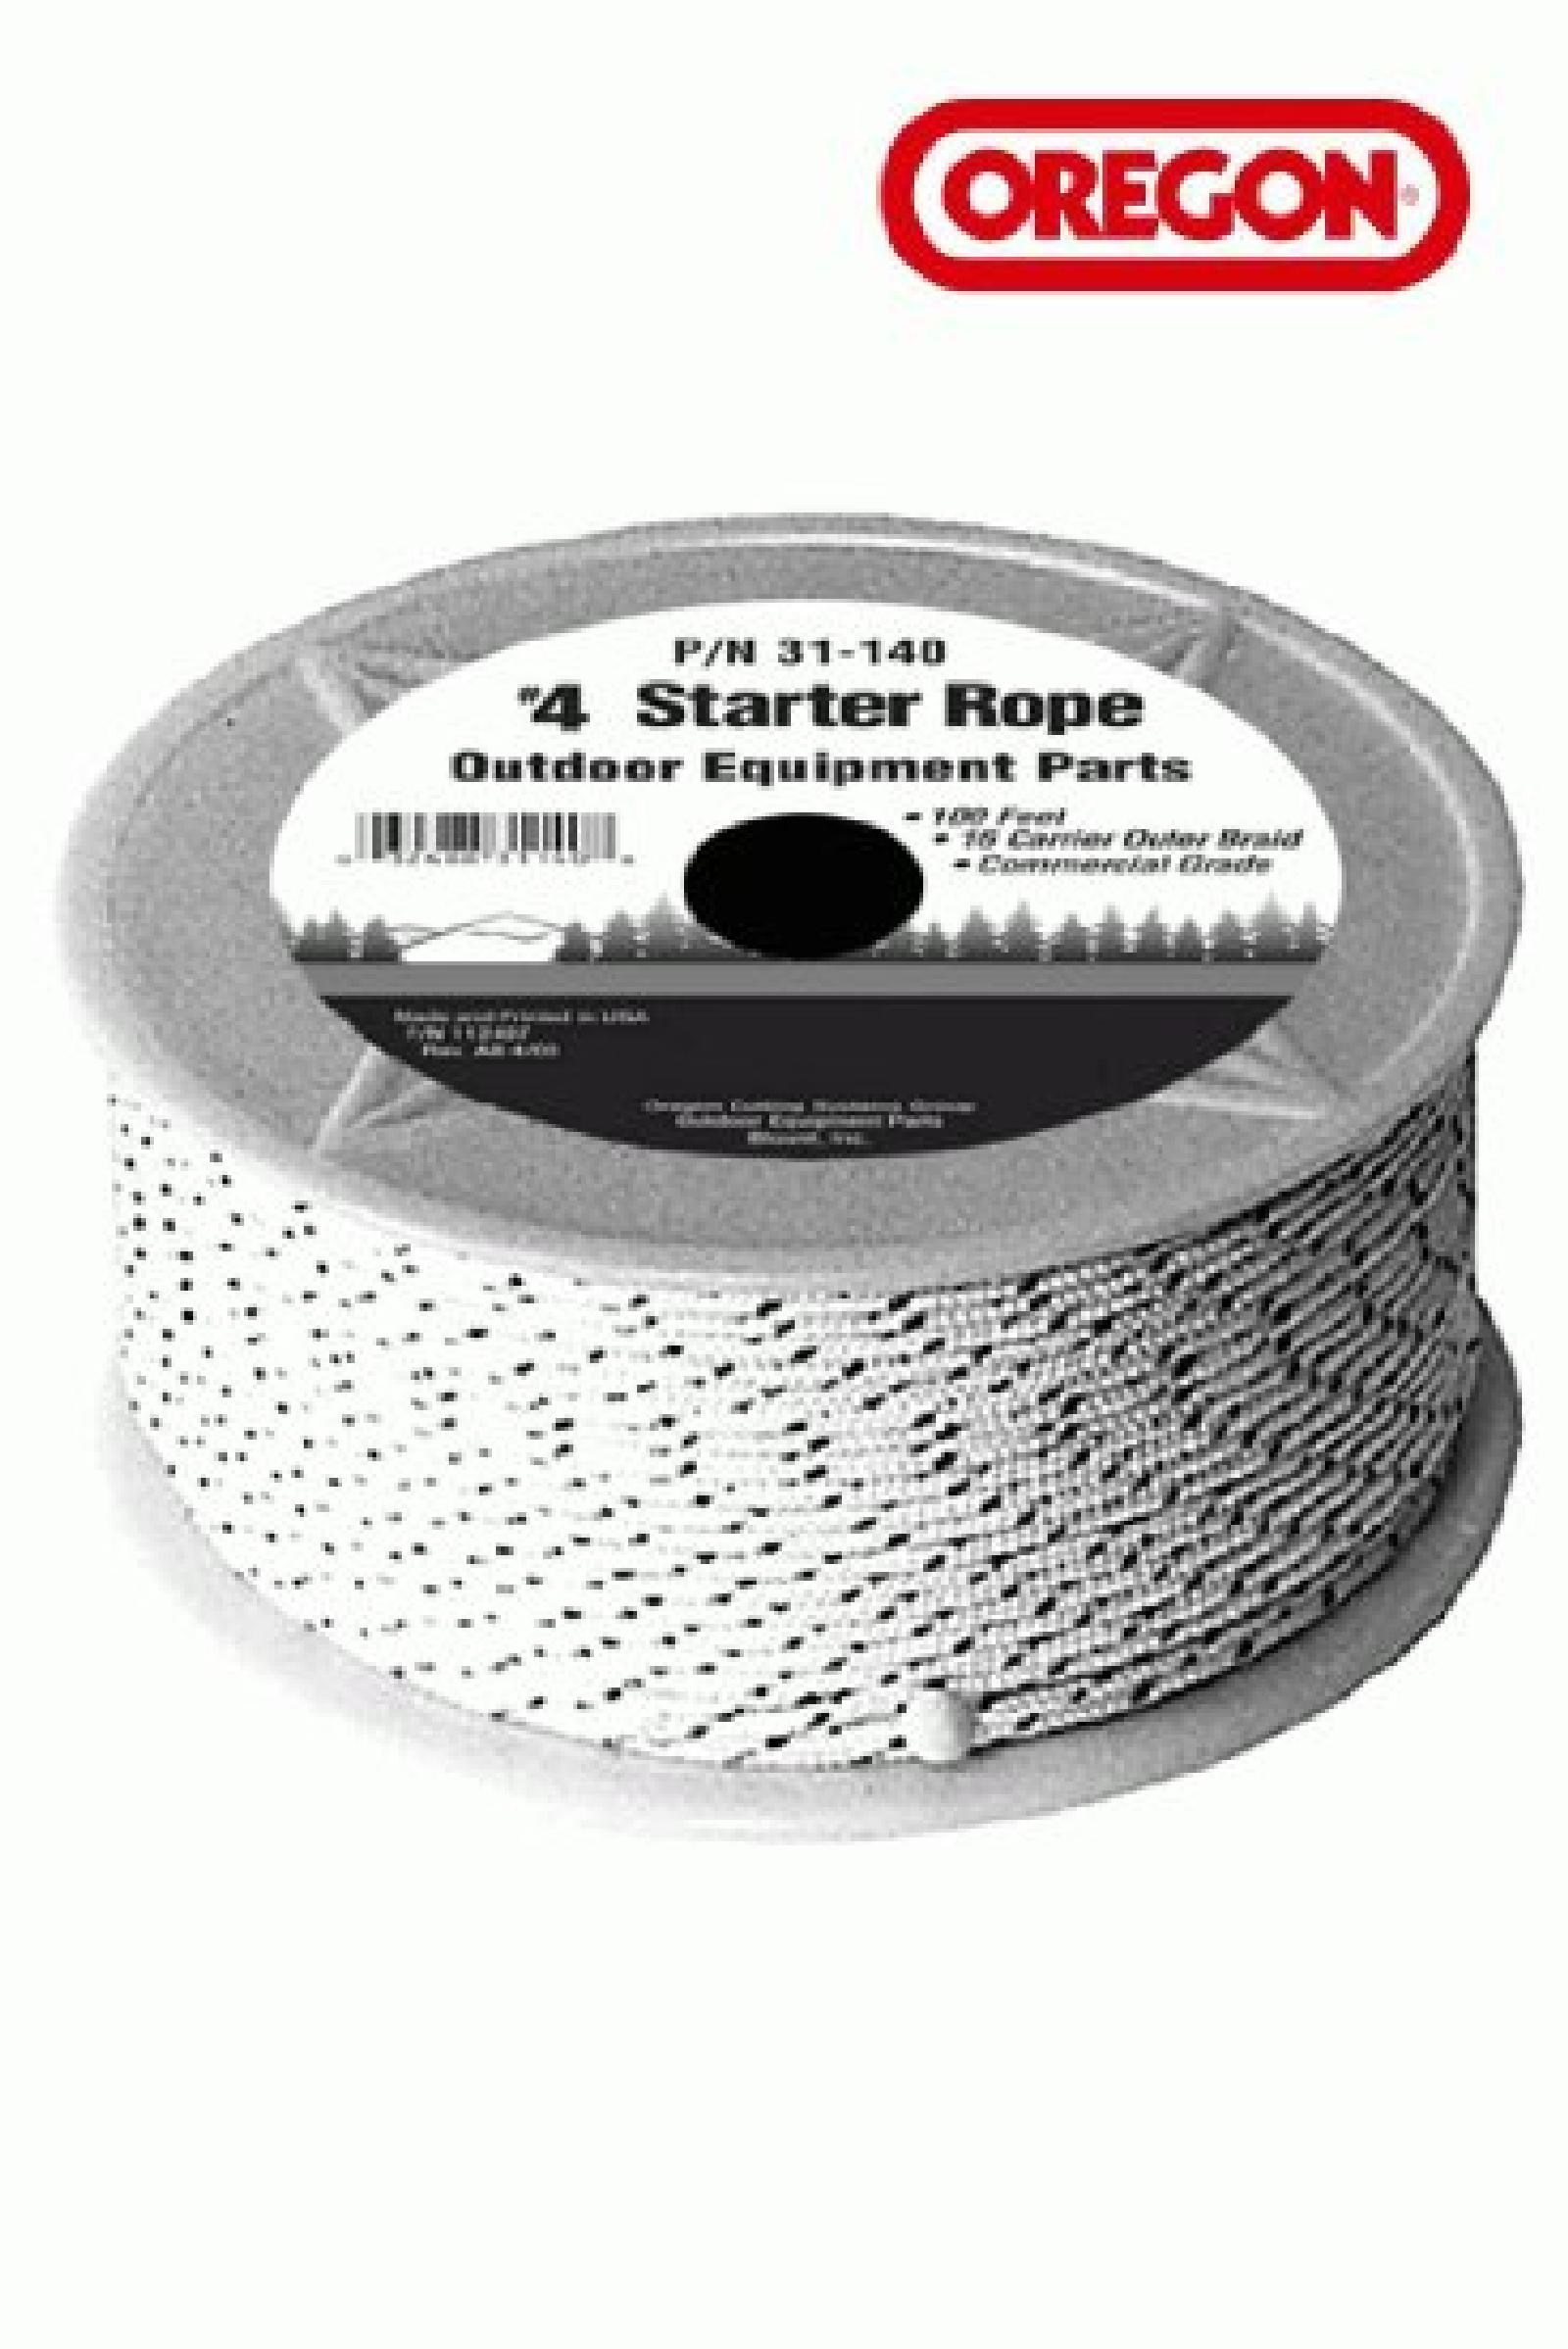 STARTER ROPE NO. 4 100FT part# 31-140 by Oregon - Click Image to Close